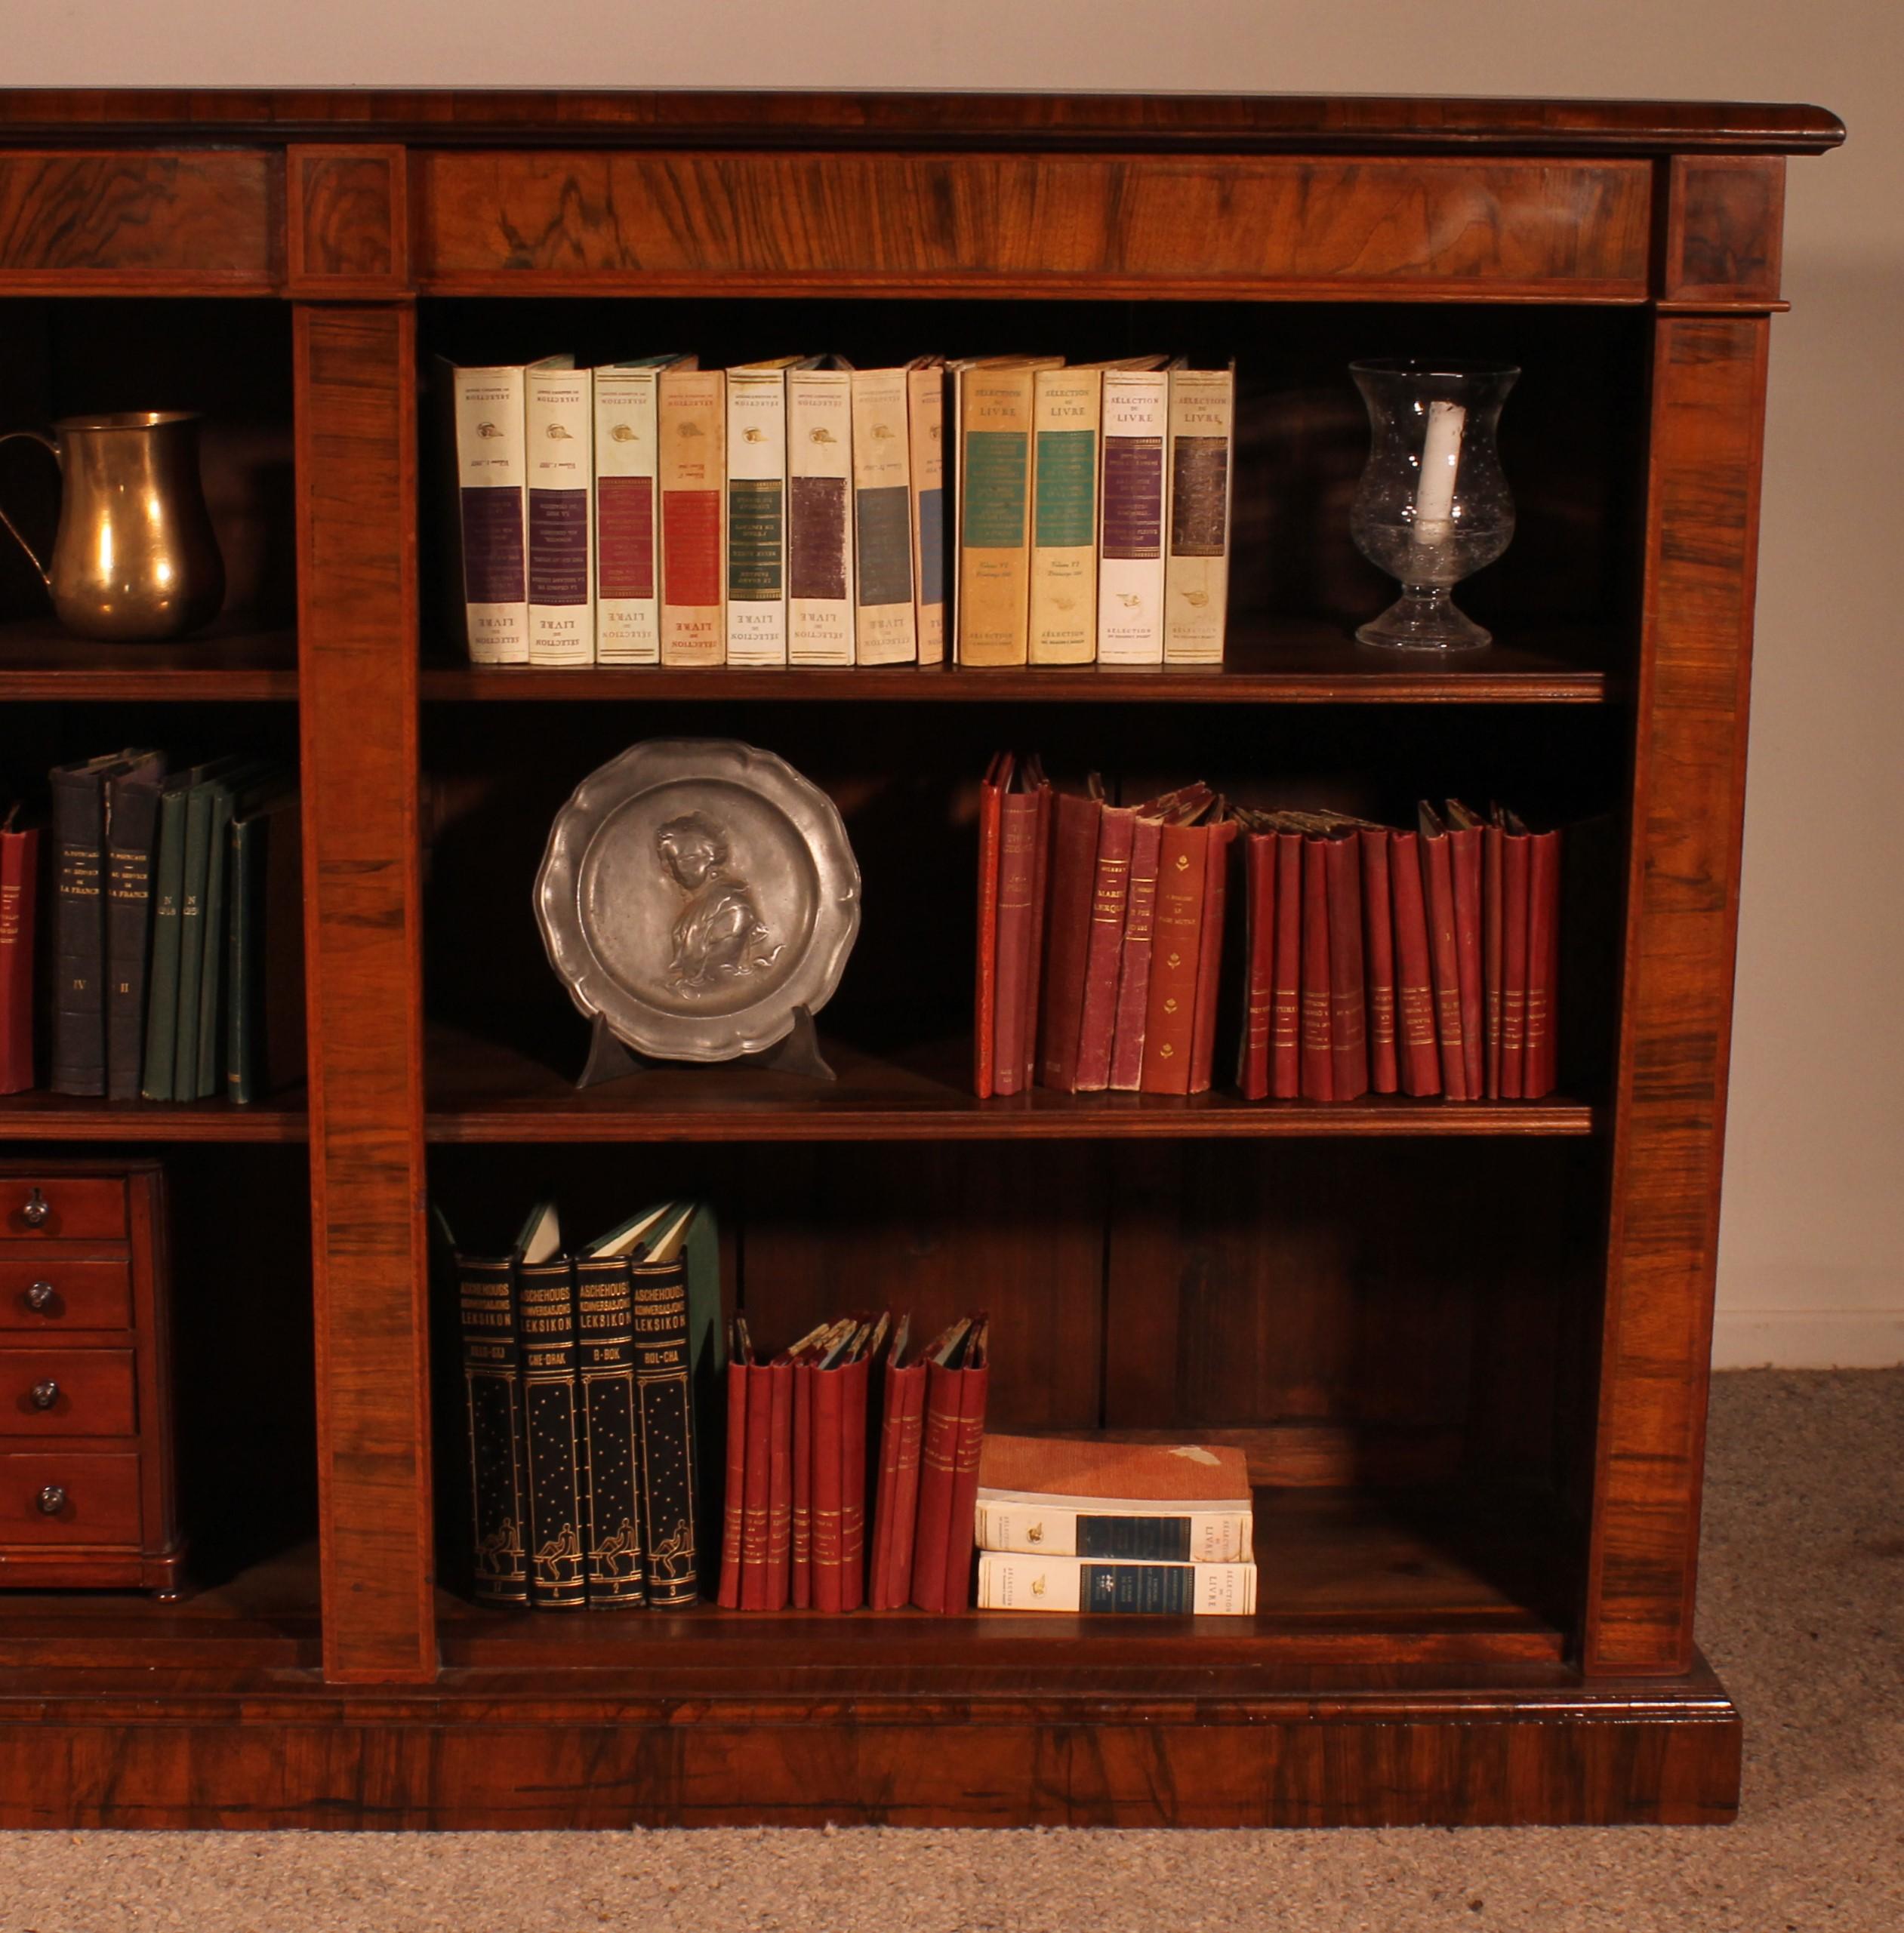 British Large Open Bookcase In Walnut And Inlays From The 19th Century